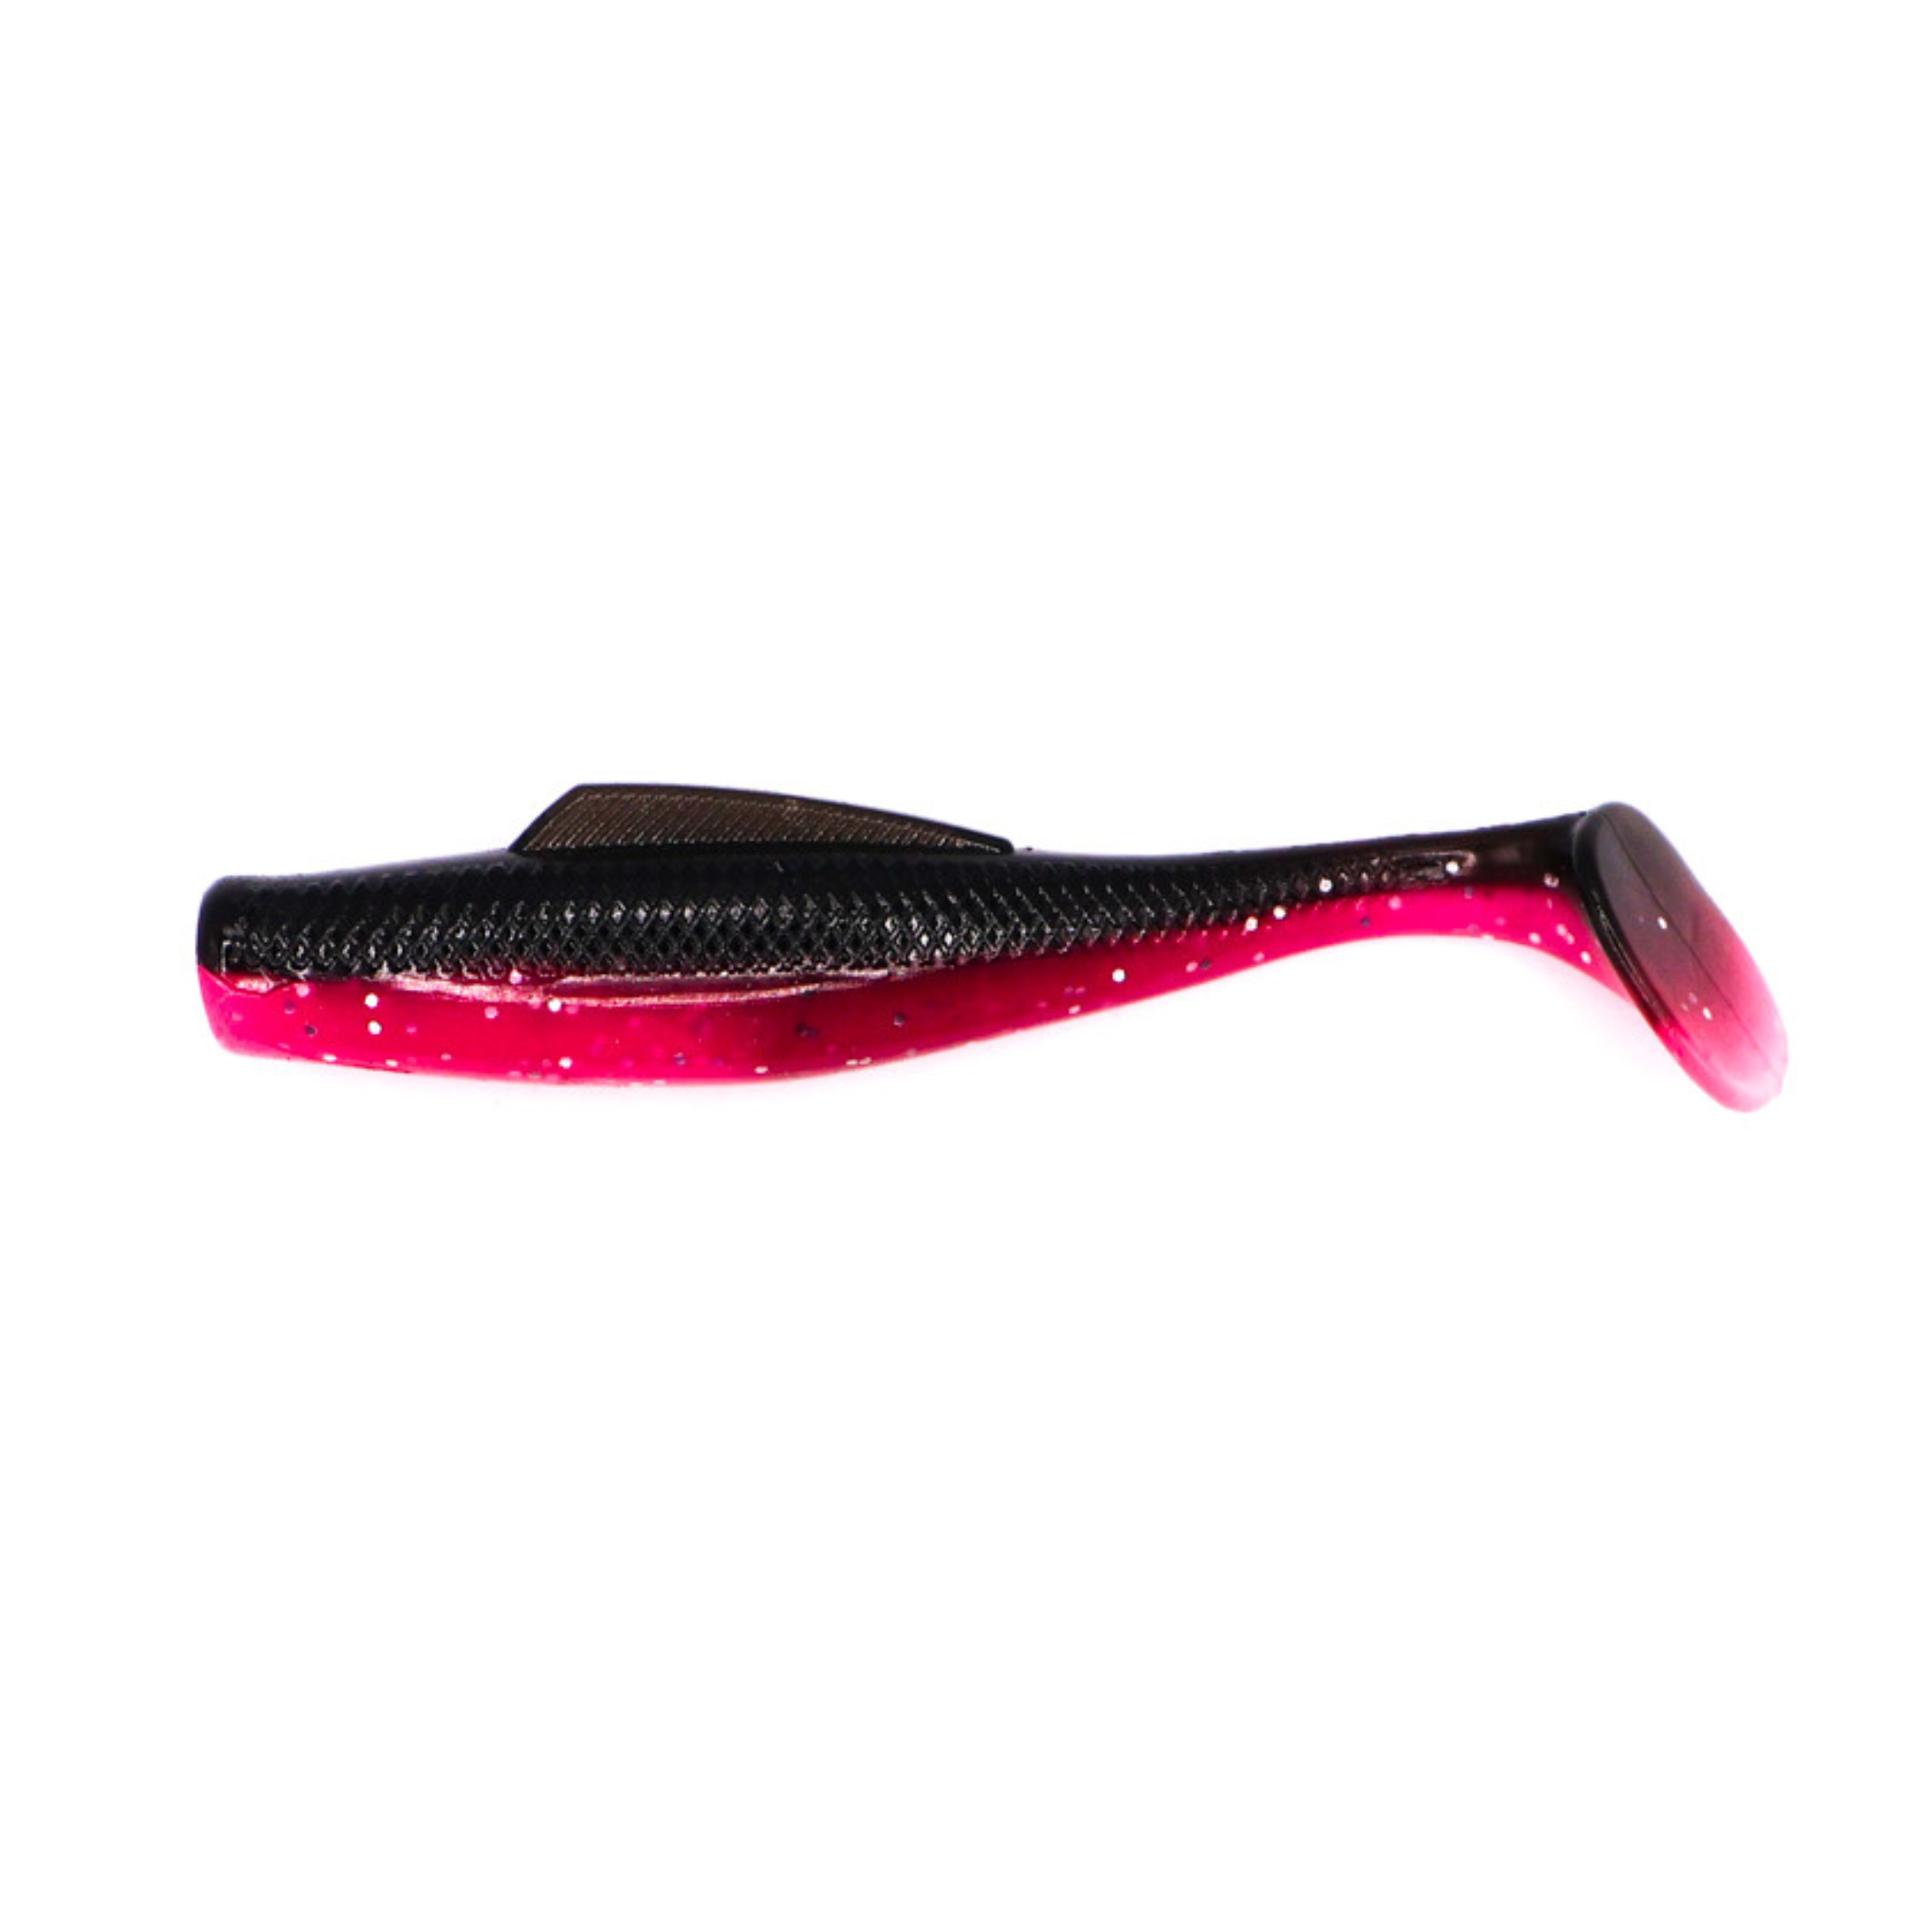 Bionic Minnow, Red Hornet – Red Devil Baits, 47% OFF